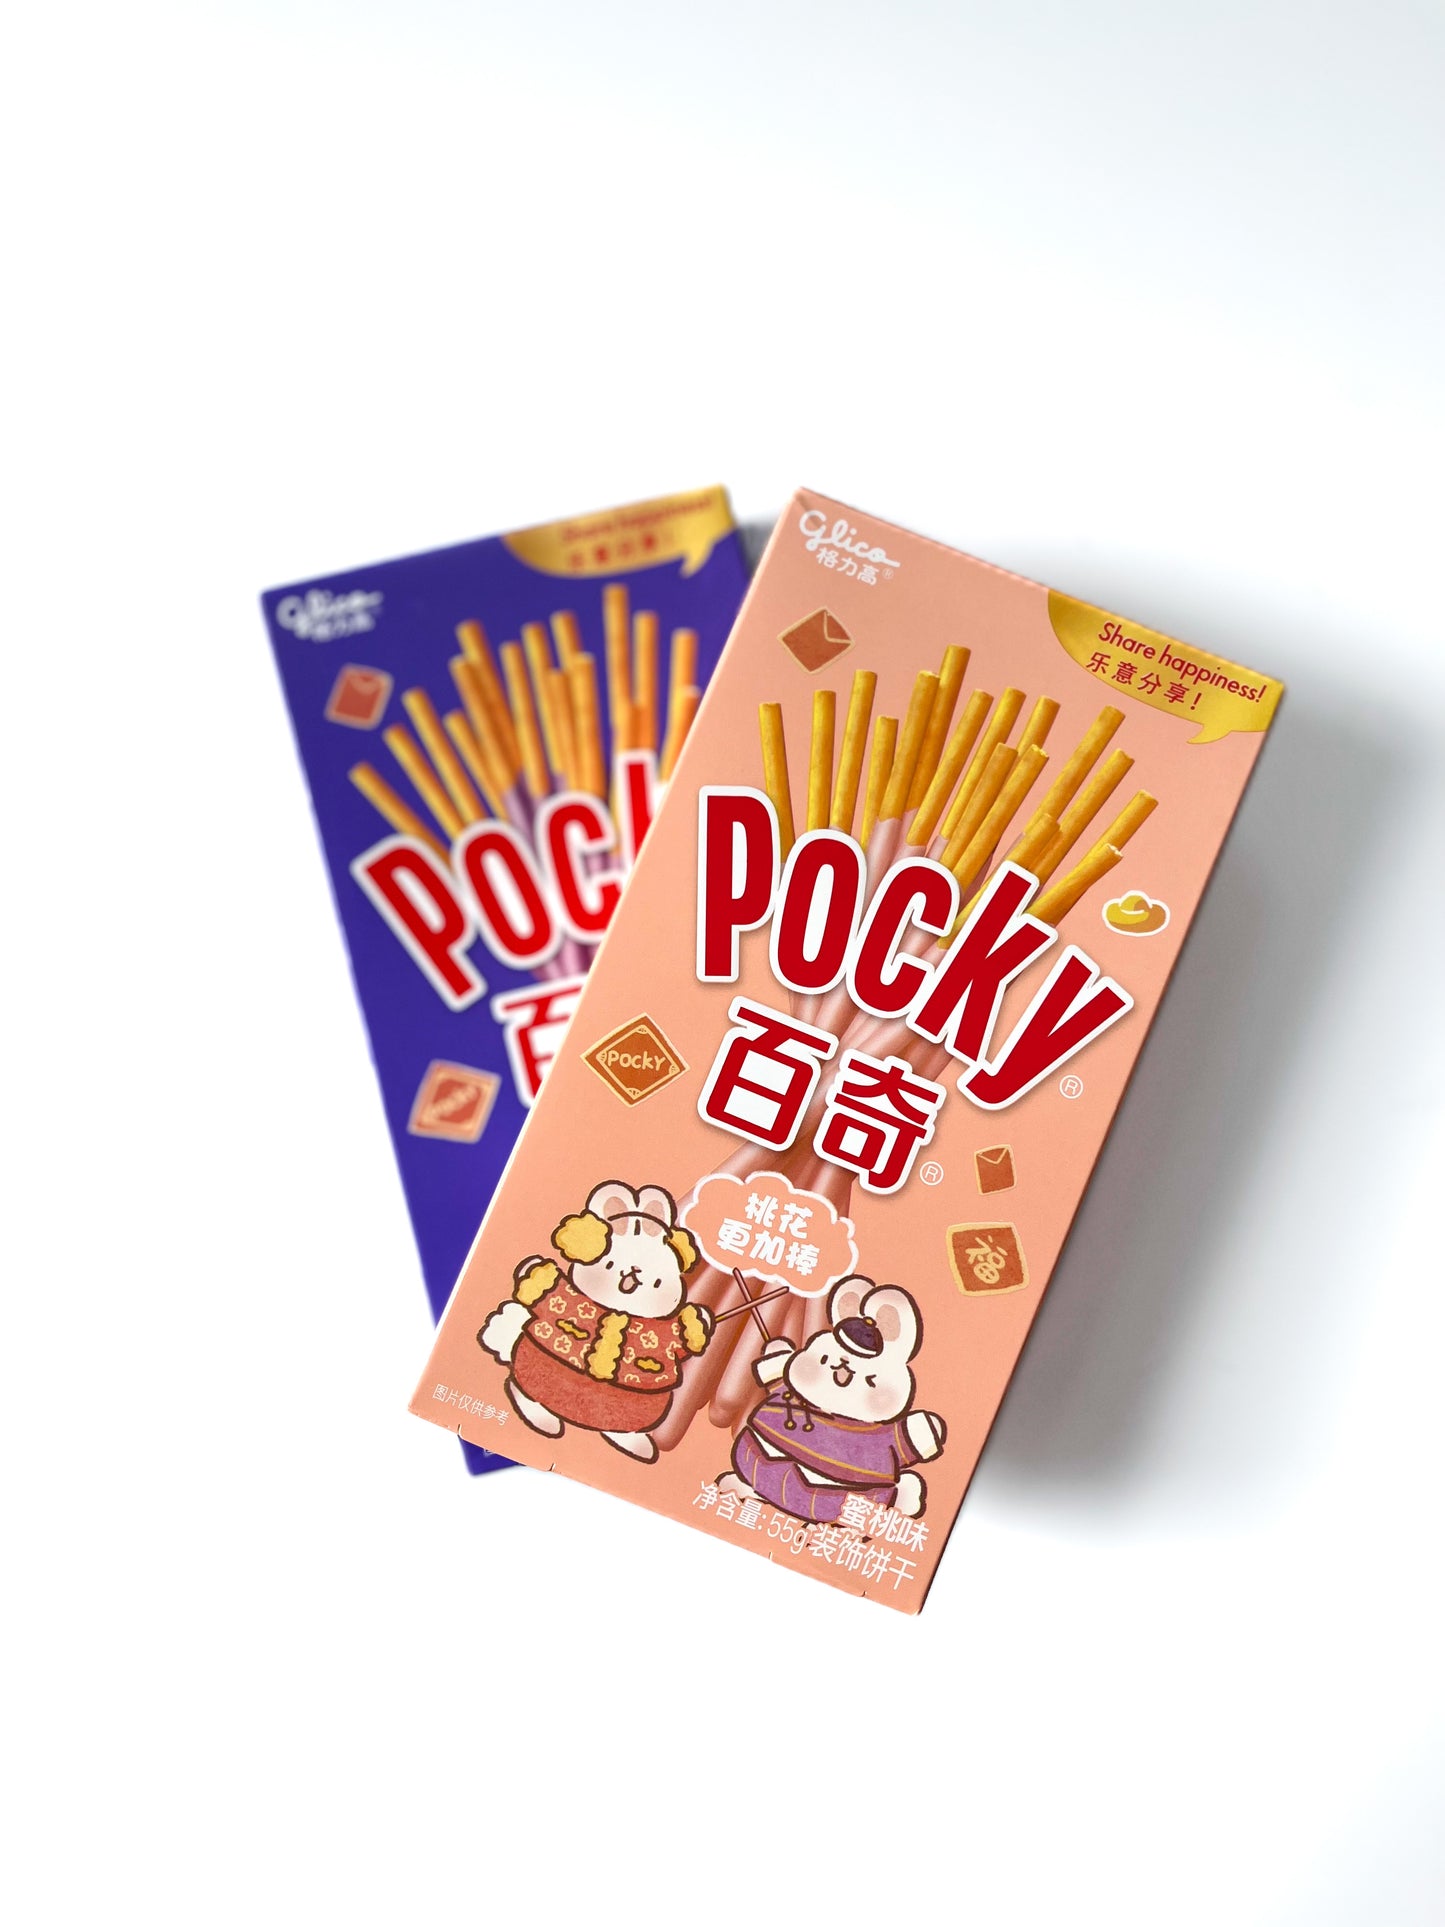 A birds eye view of a box of peach pocky biscuits stacked on a box of double berry pocky biscuits on a white background.